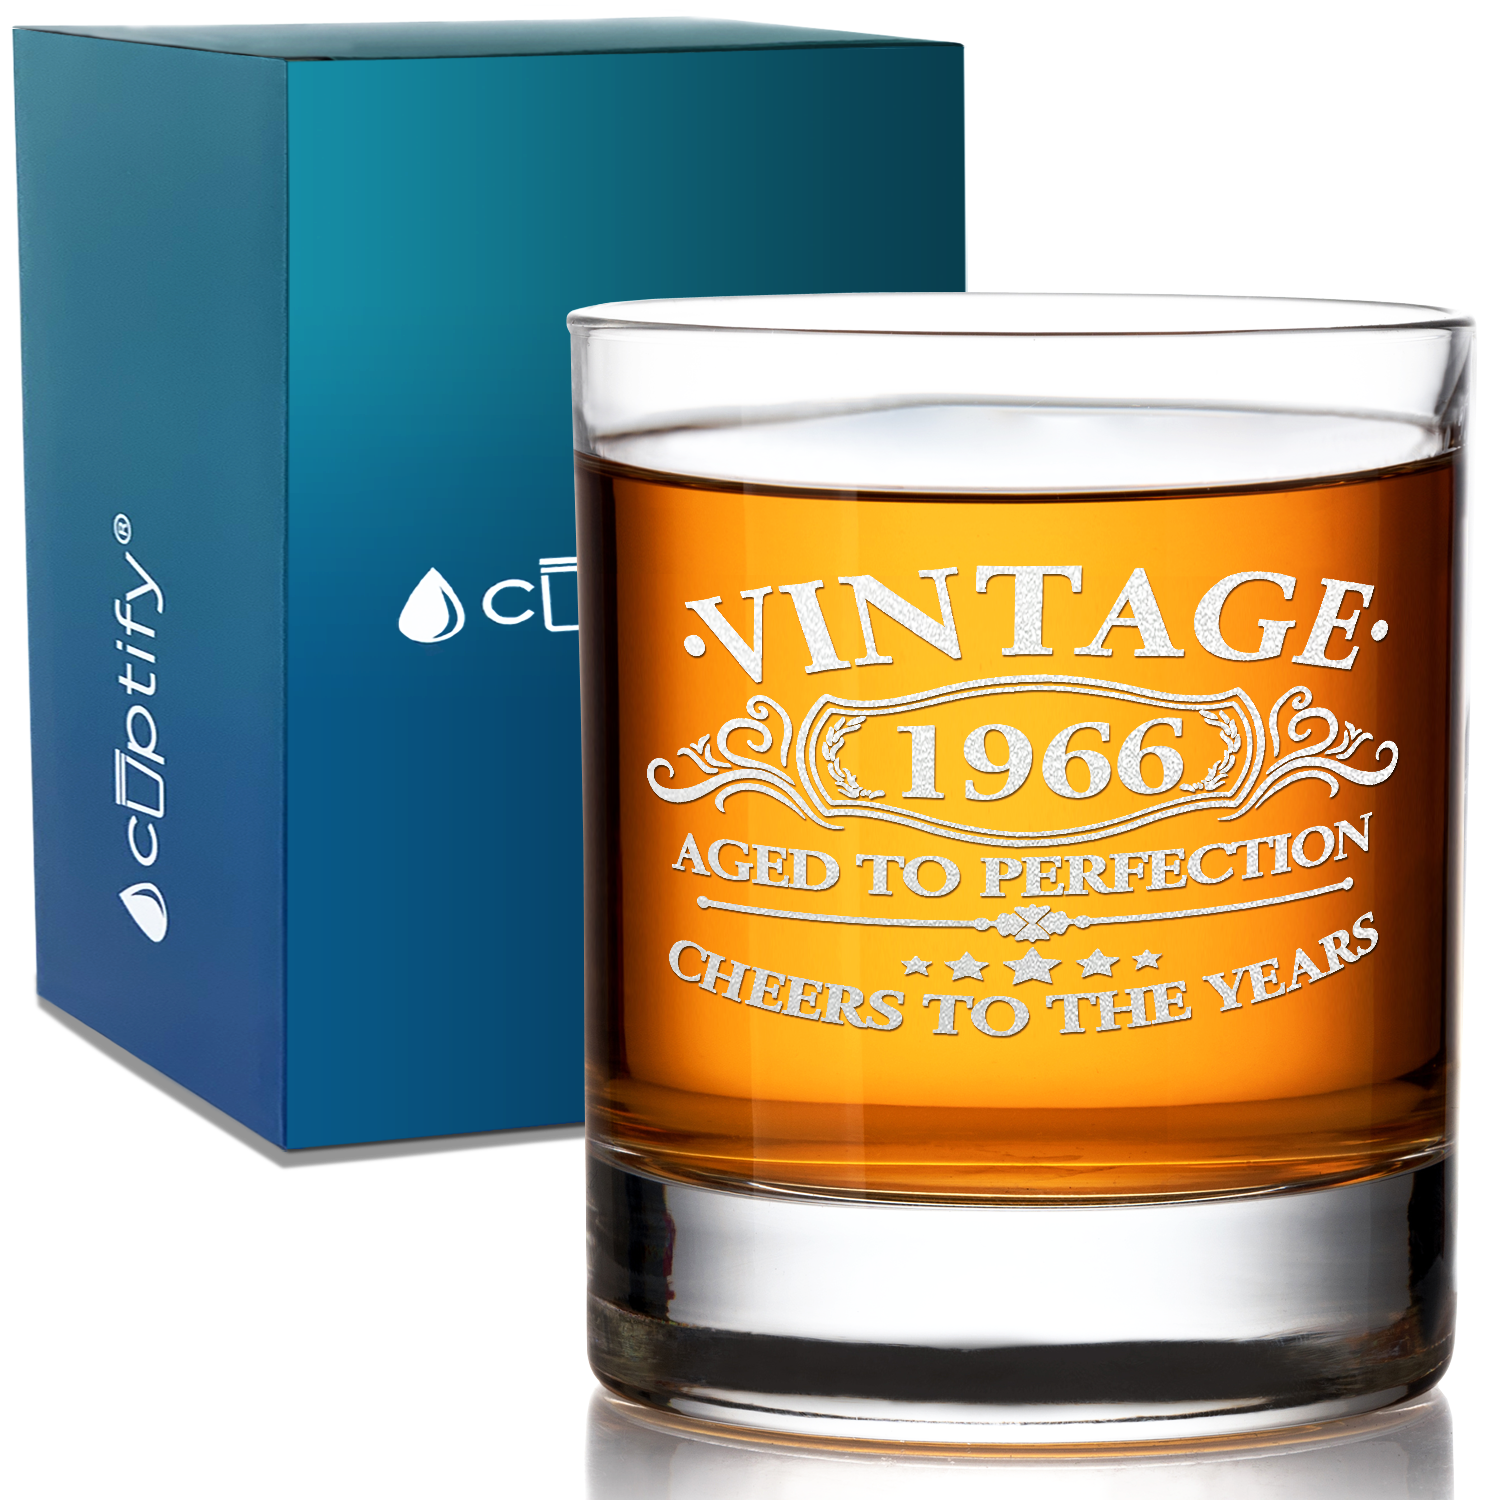 55th Birthday Gift Vintage Aged To Perfection Cheers To 55 Years 1966 Laser Engraved on 10.25oz Old Fashion Glass